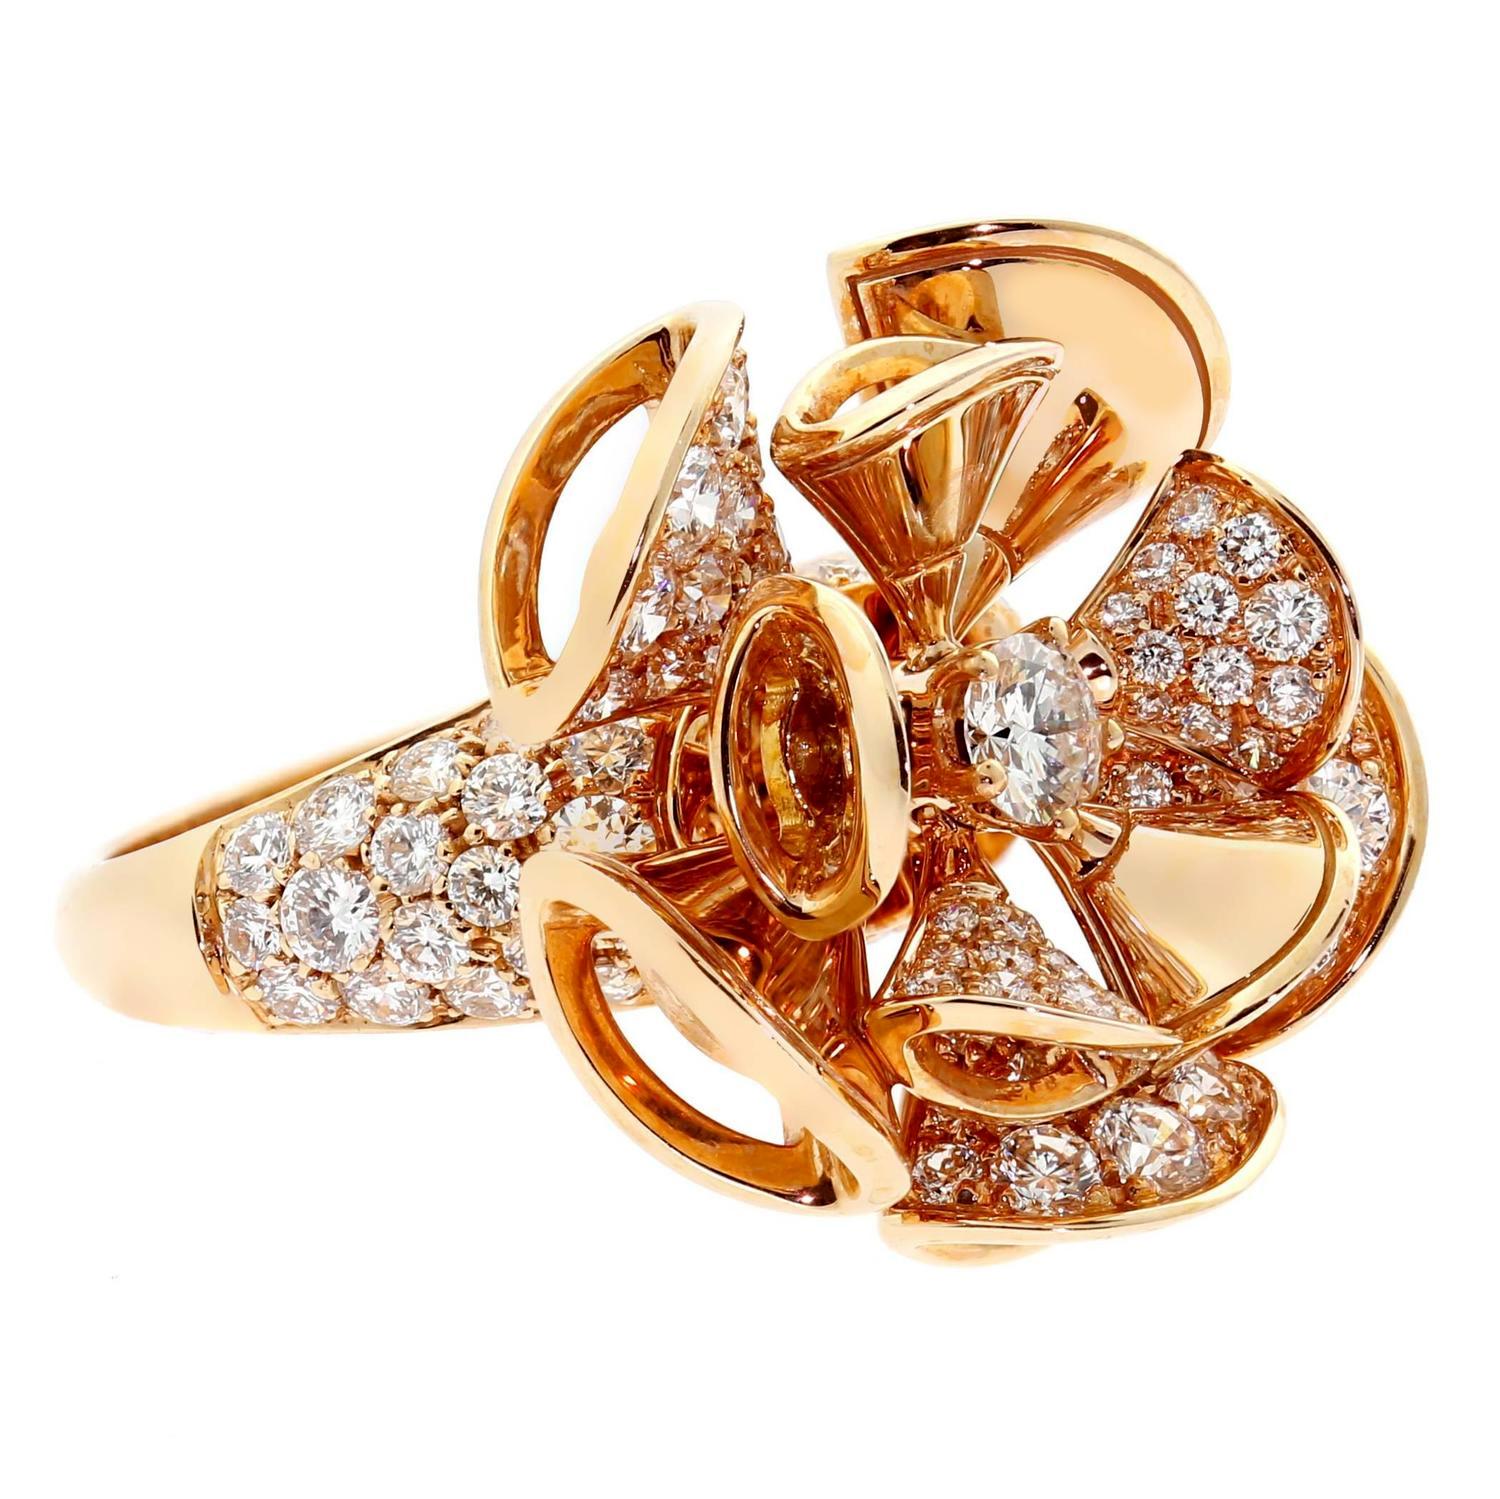 There is nothing simple or understated about this Diva Diamond Gold ring from Bulgari. Featuring 117 of the finest Bulgari round brilliant cut diamonds weighing 3.07ct and set in 18k rose gold, this ring is sure to make a statement.

Size 6